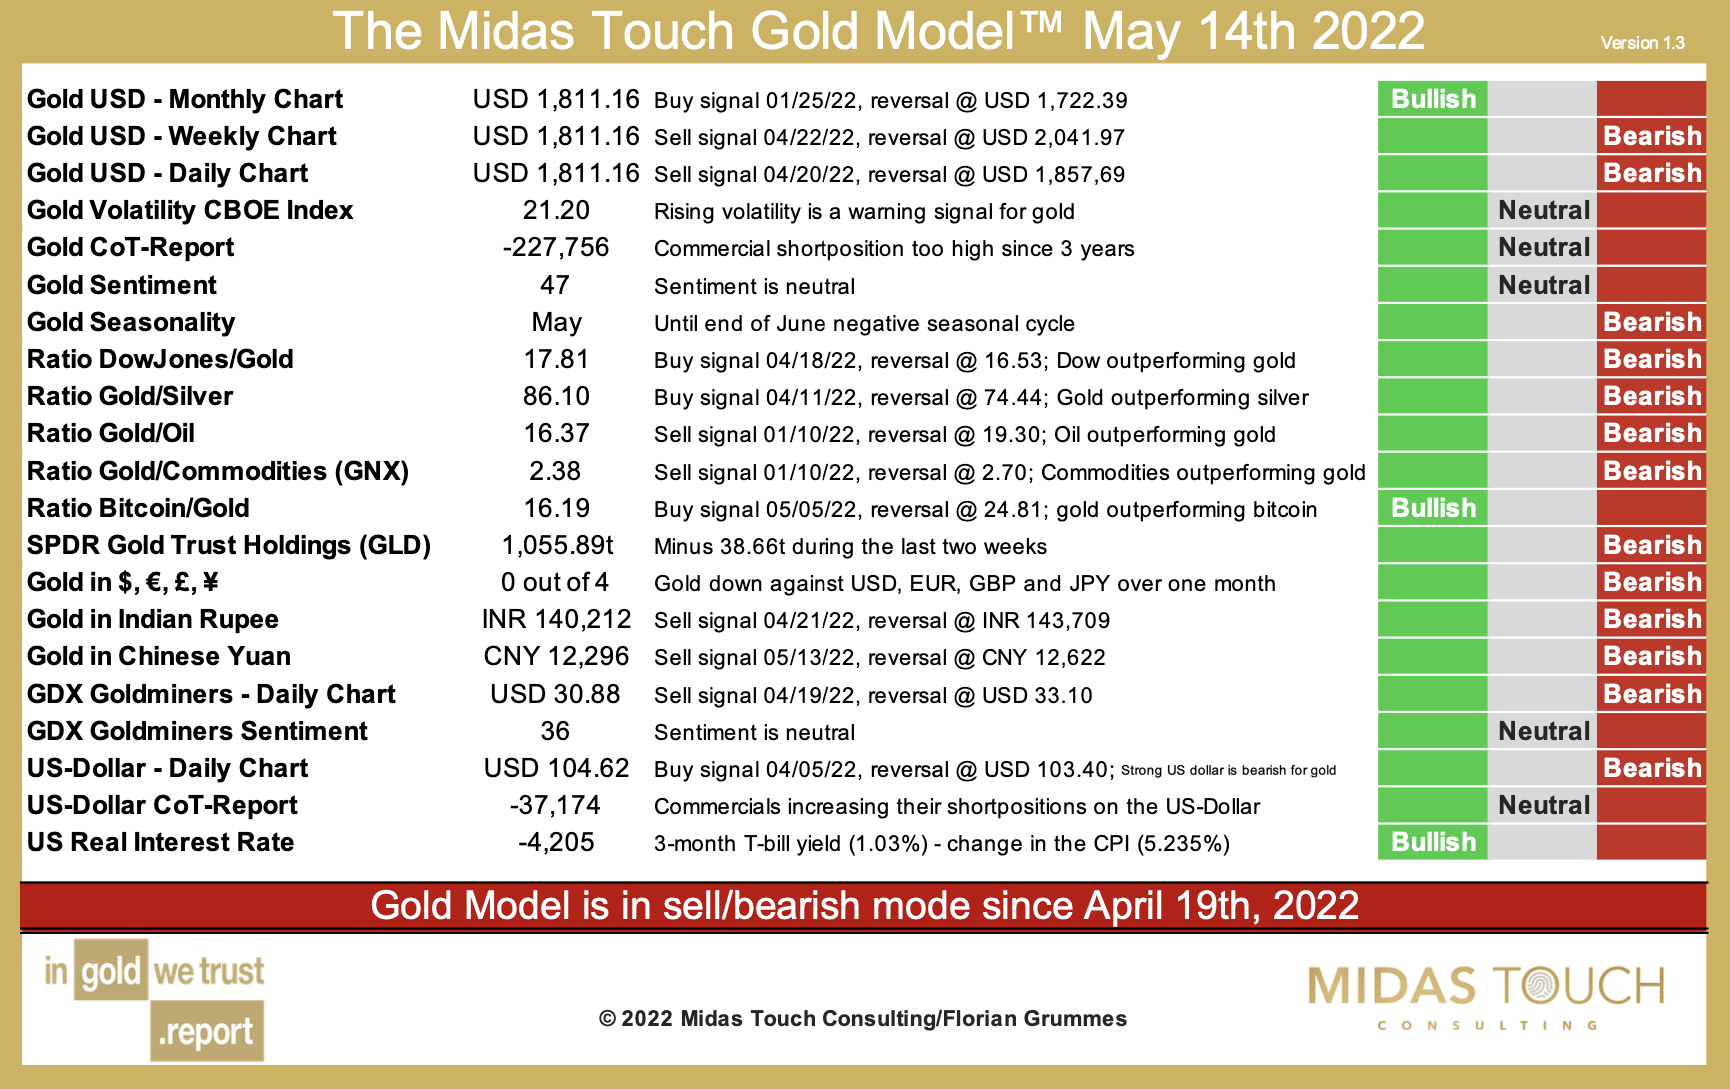 The Midas Touch Gold Model™ as of May 14th, 2022. Source: Midas Touch Consulting. The Midas Touch Gold Model™ Update.